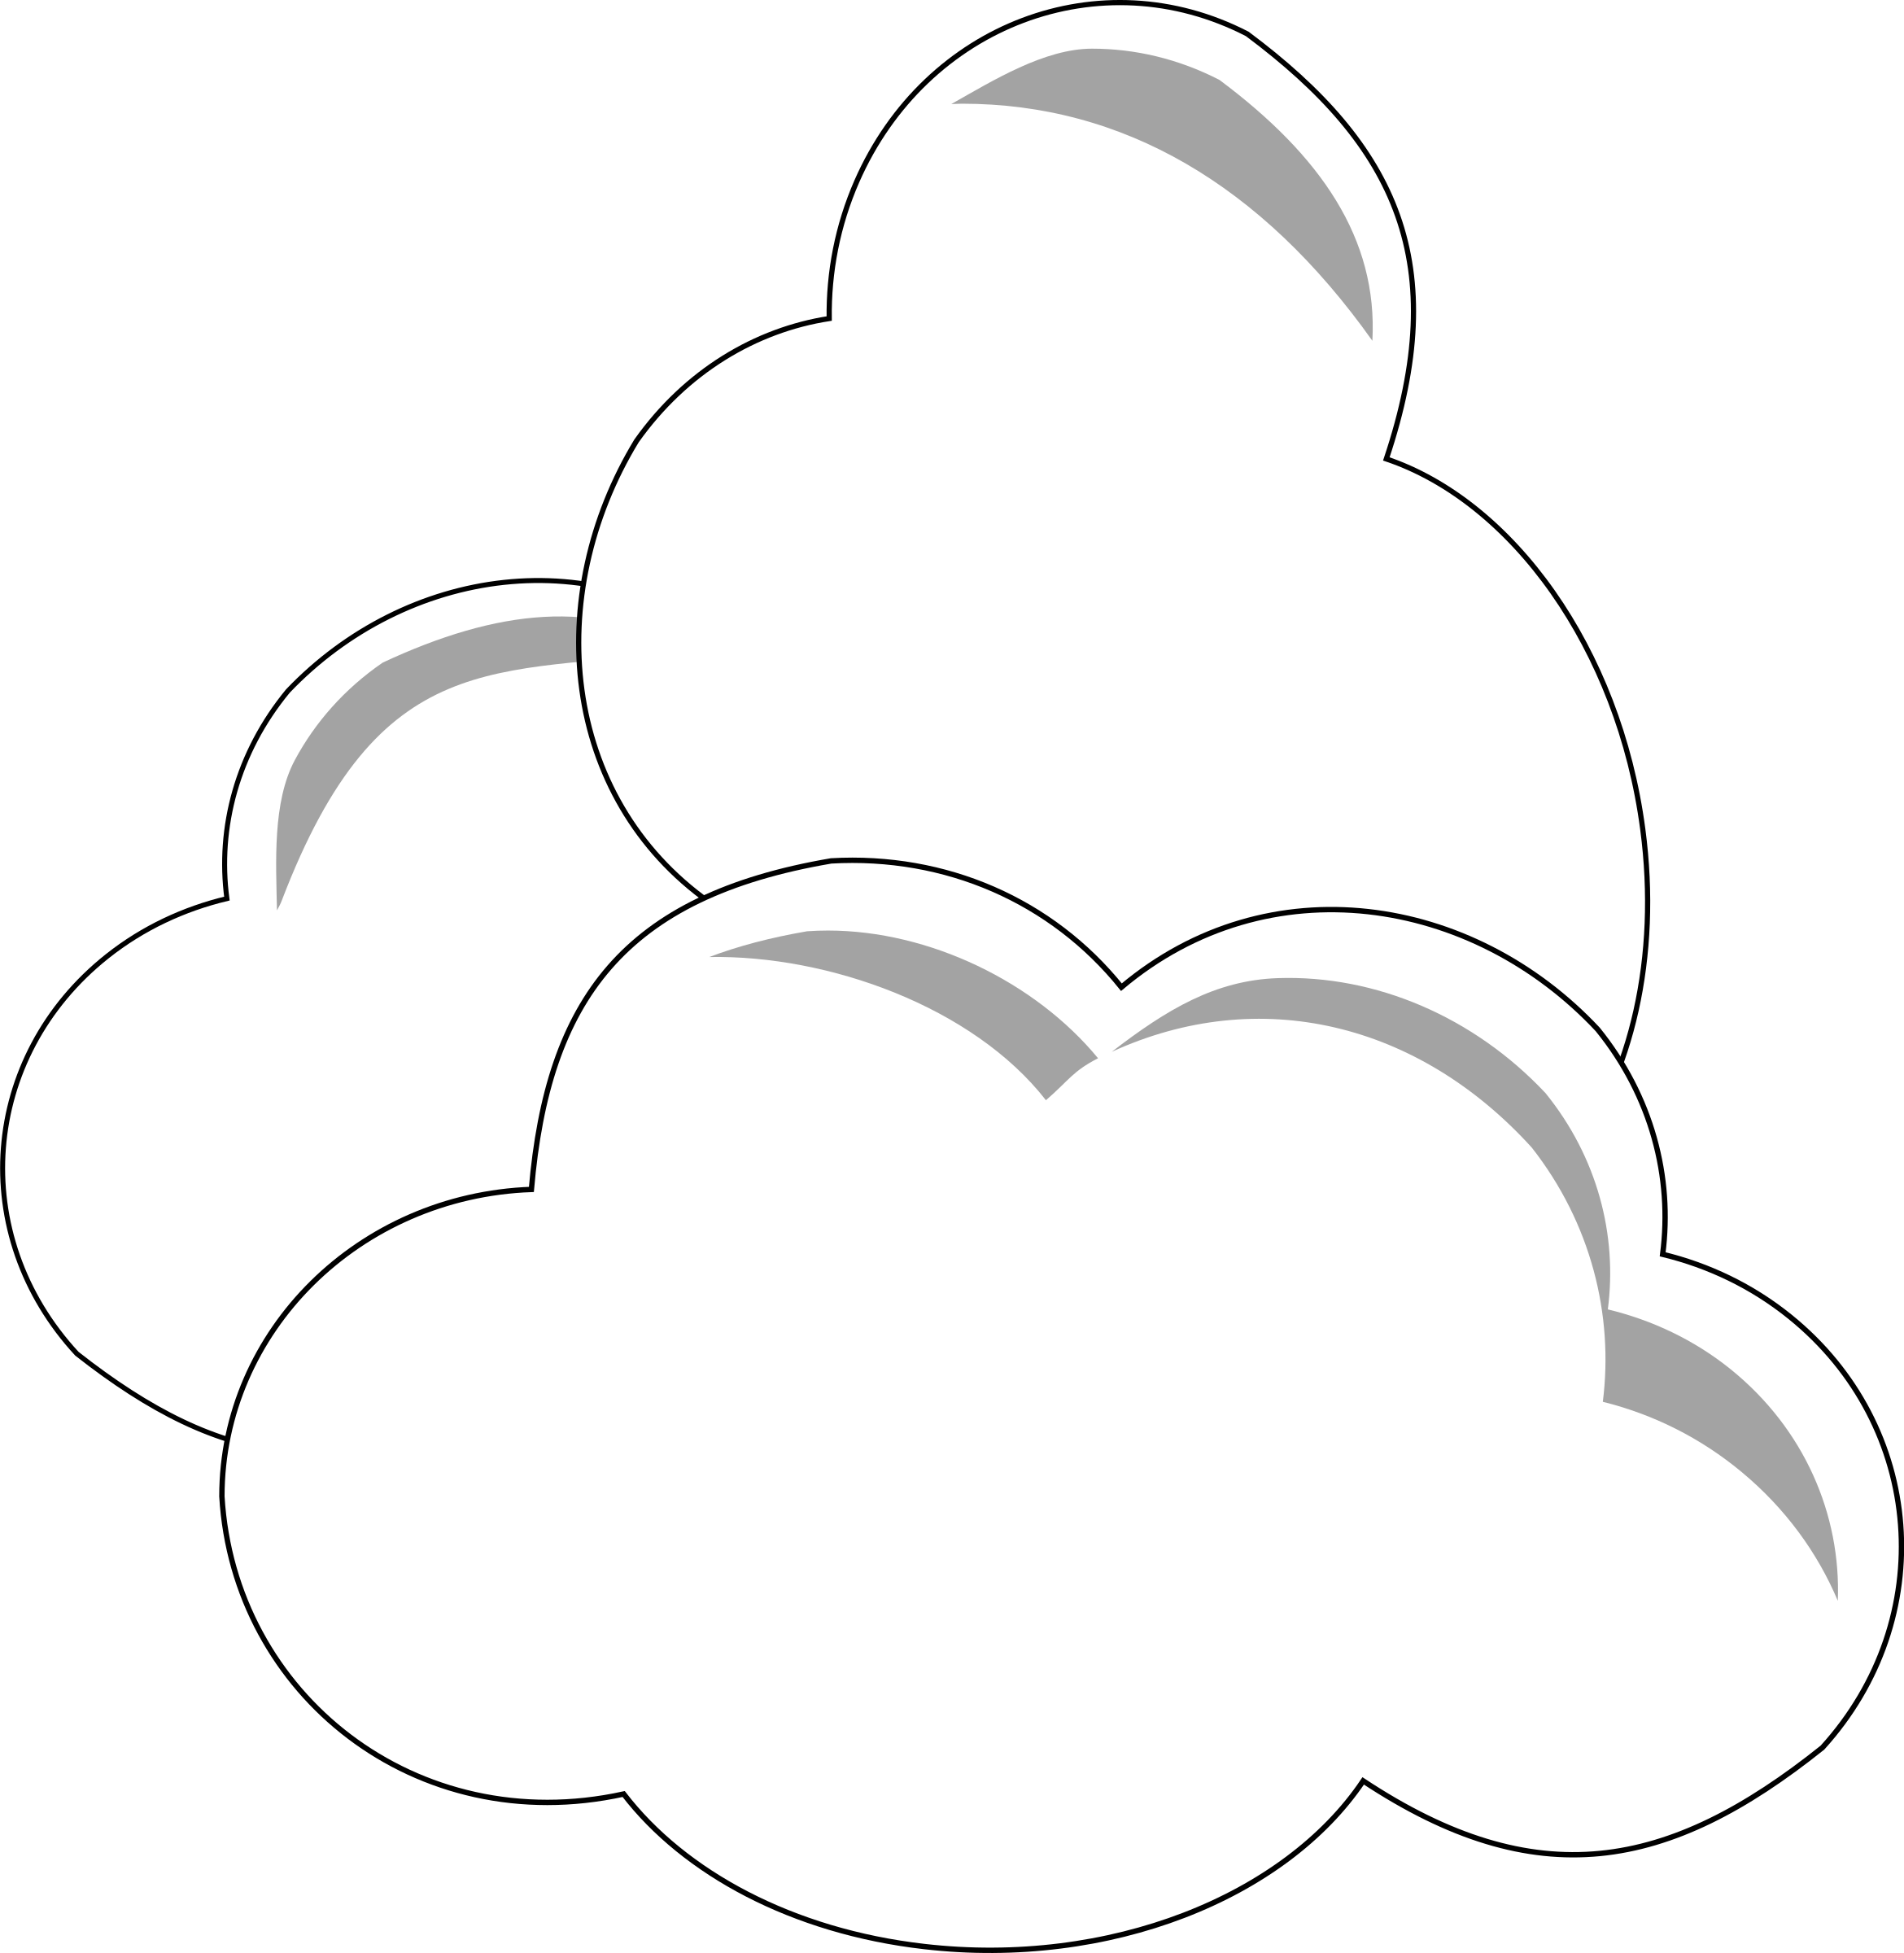 Big image png. Clouds clipart simple